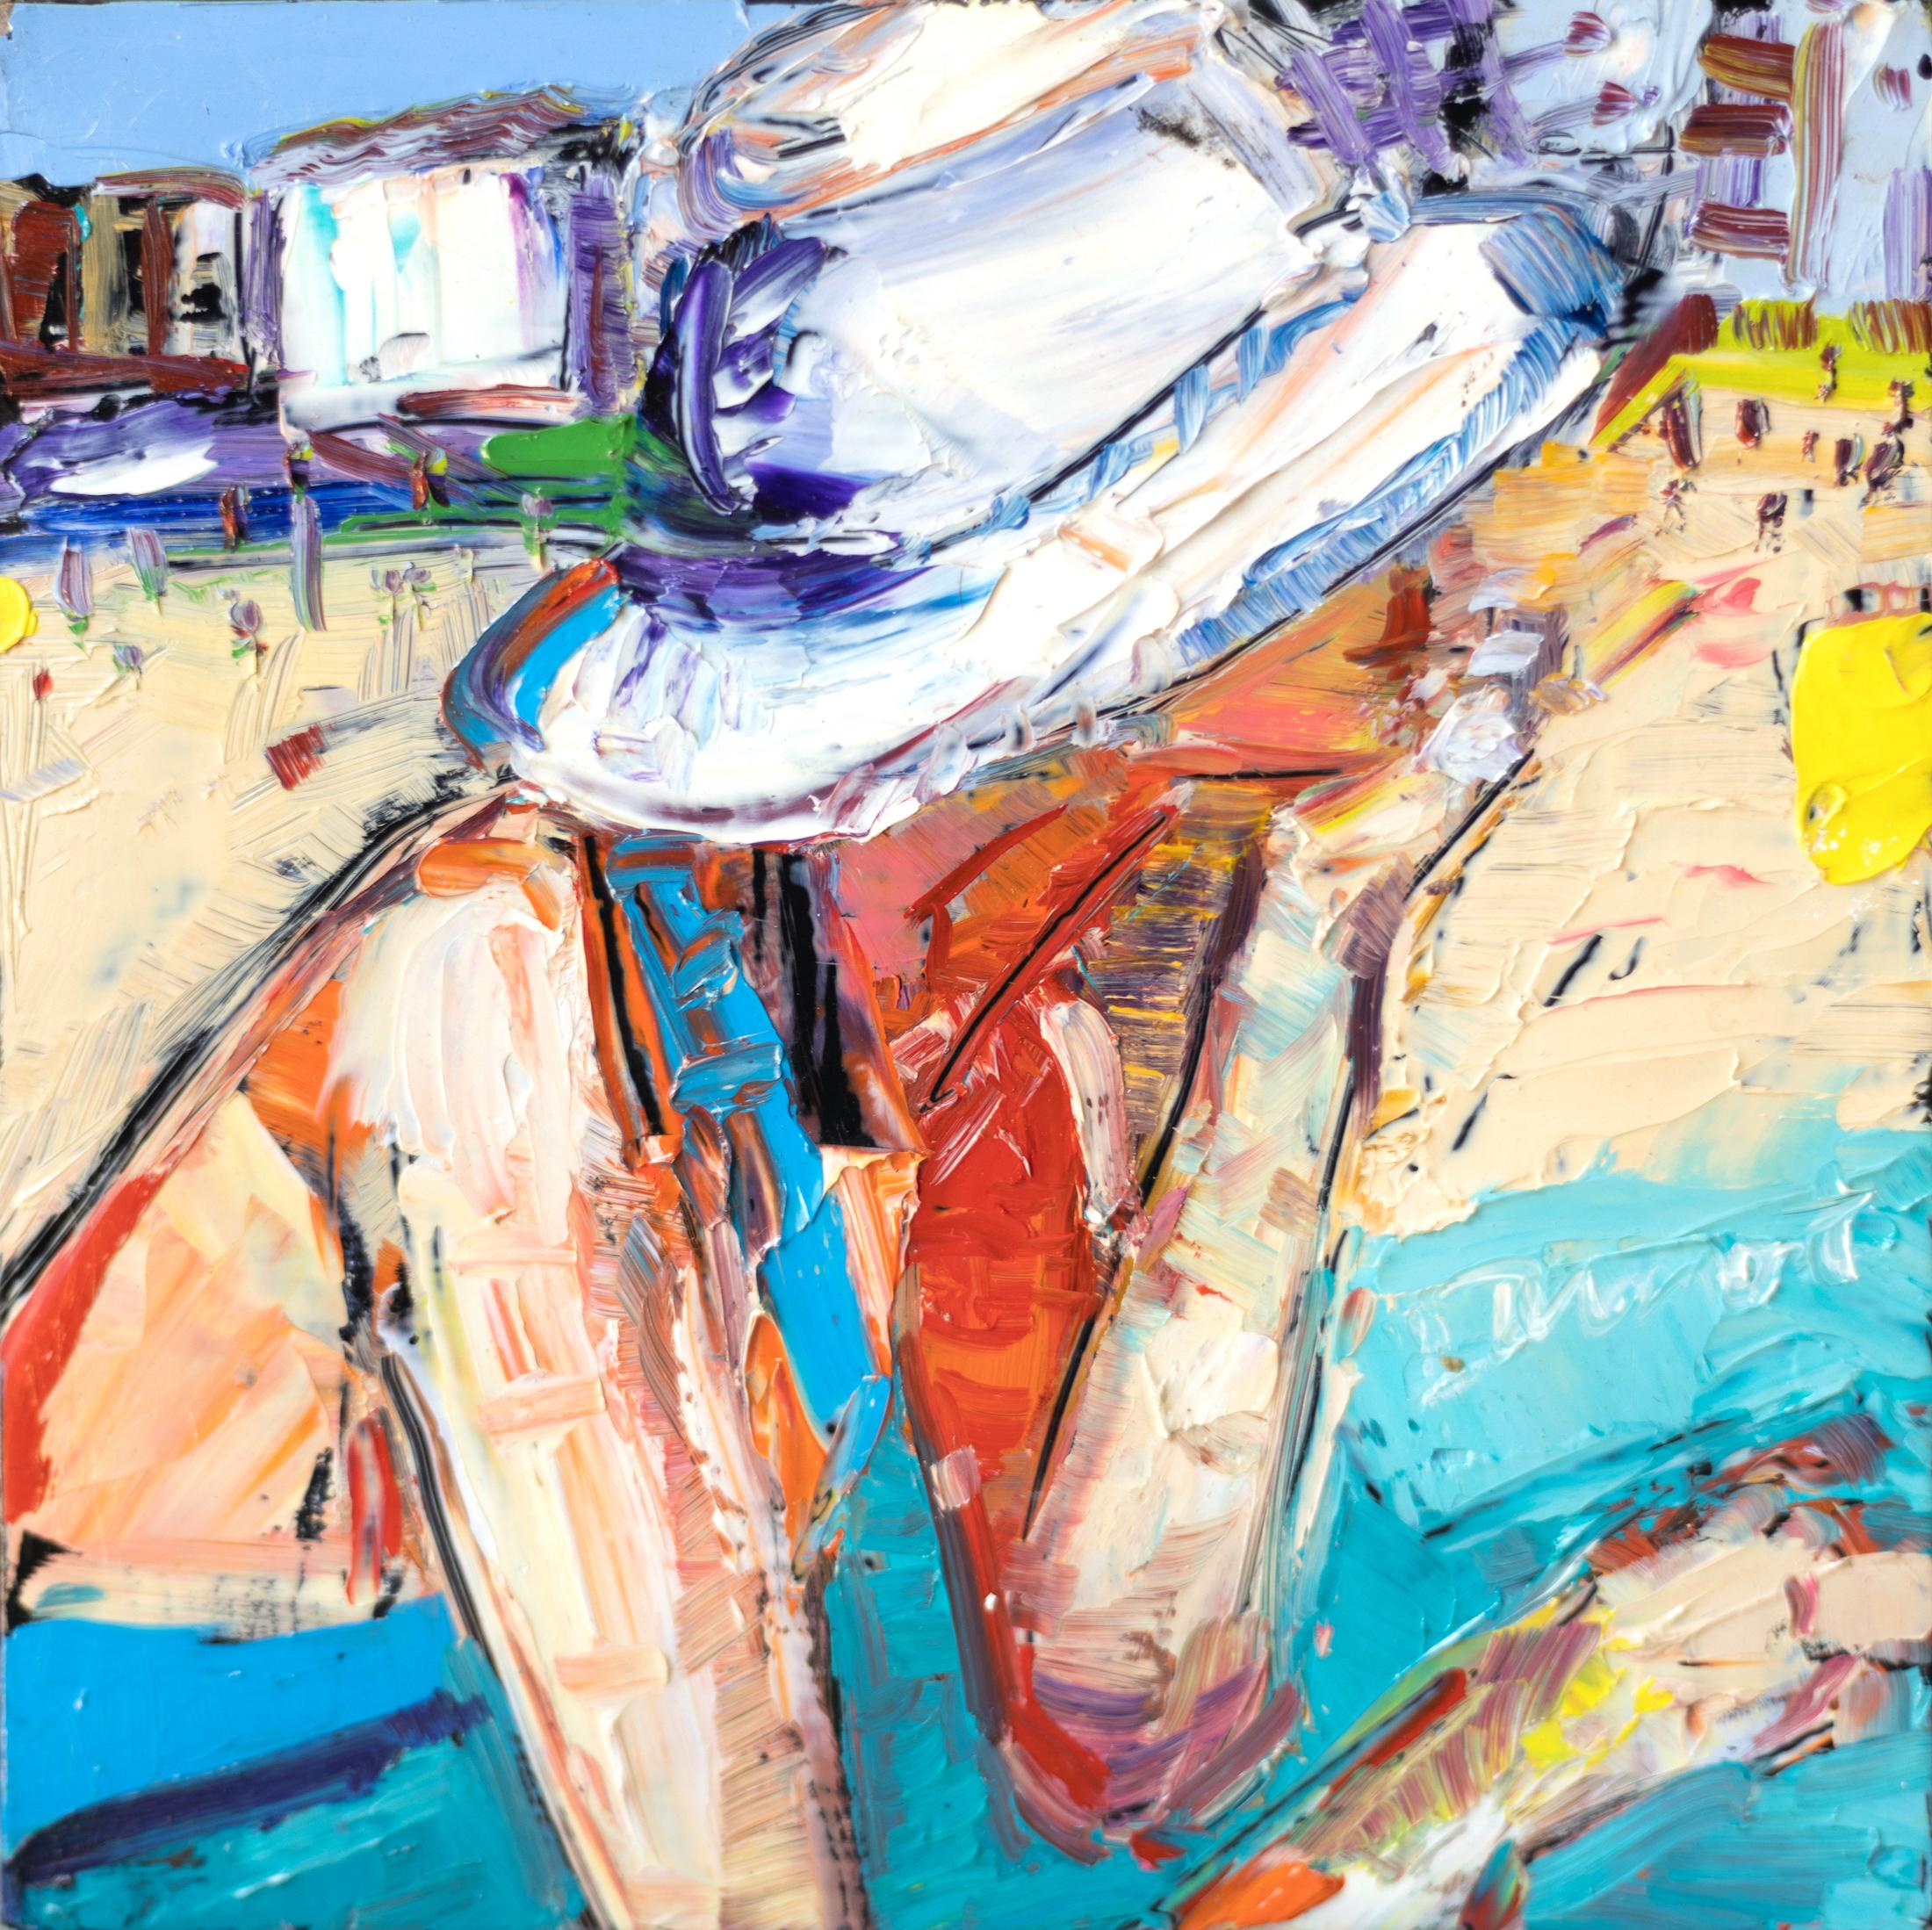 Figurative Painting Linda Dumont - « Dreaming on the Beach » - Femme expressionniste figurative